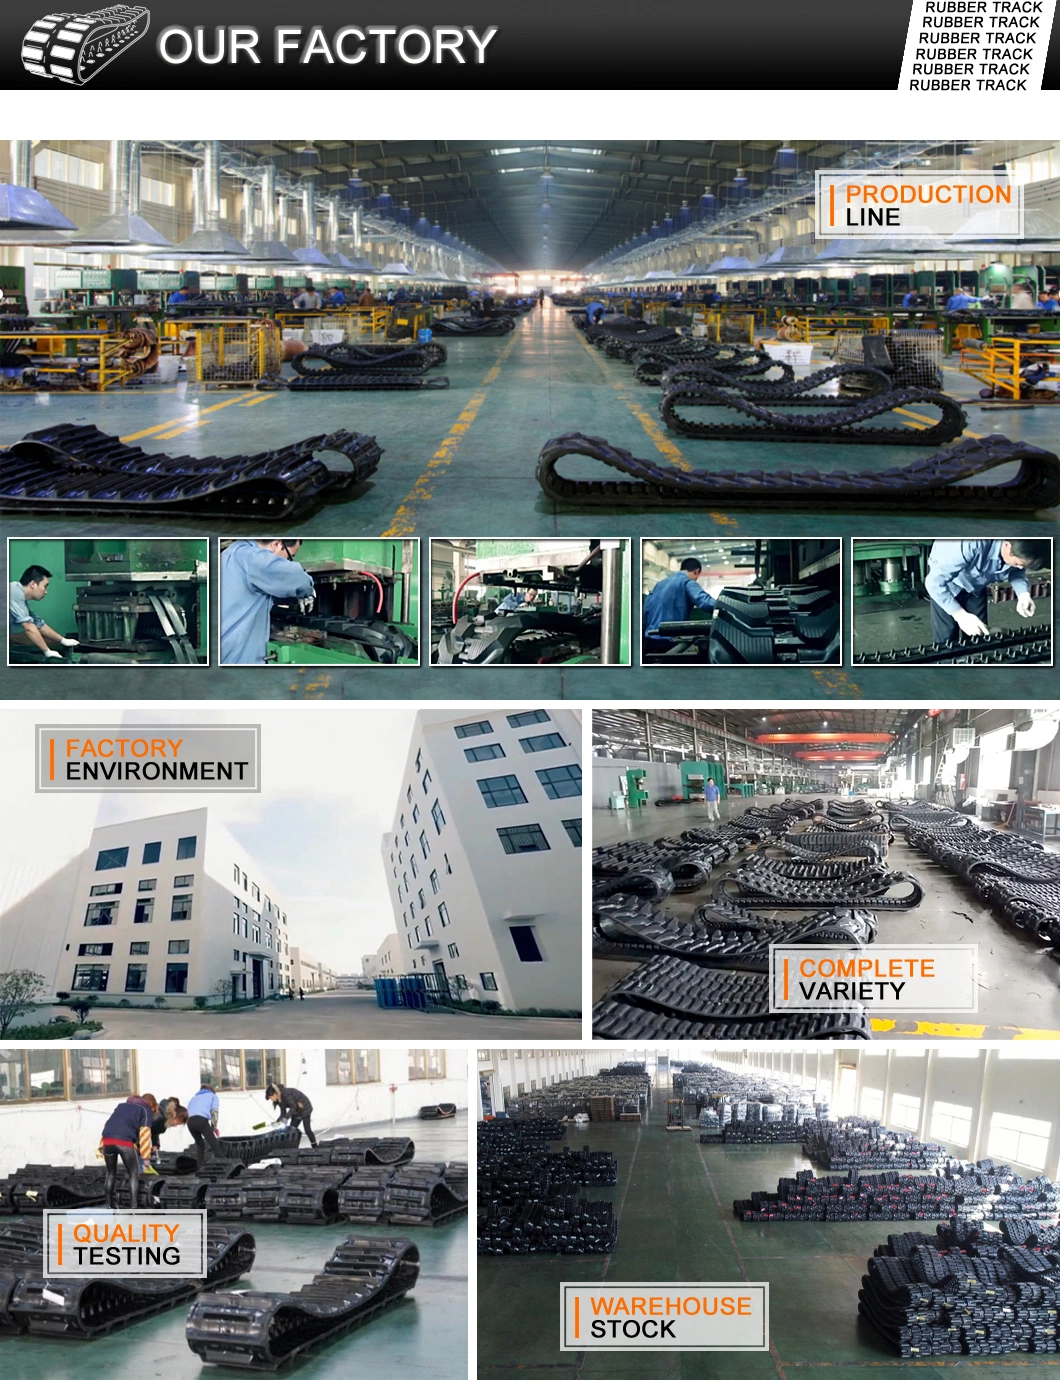 Sale Rubber Crawler Engineering Construction Machinery Parts Rubber Tracks Skid Steer Loader Small Digger Mini Excavator Rubber Track ATV Undercarriage Parts